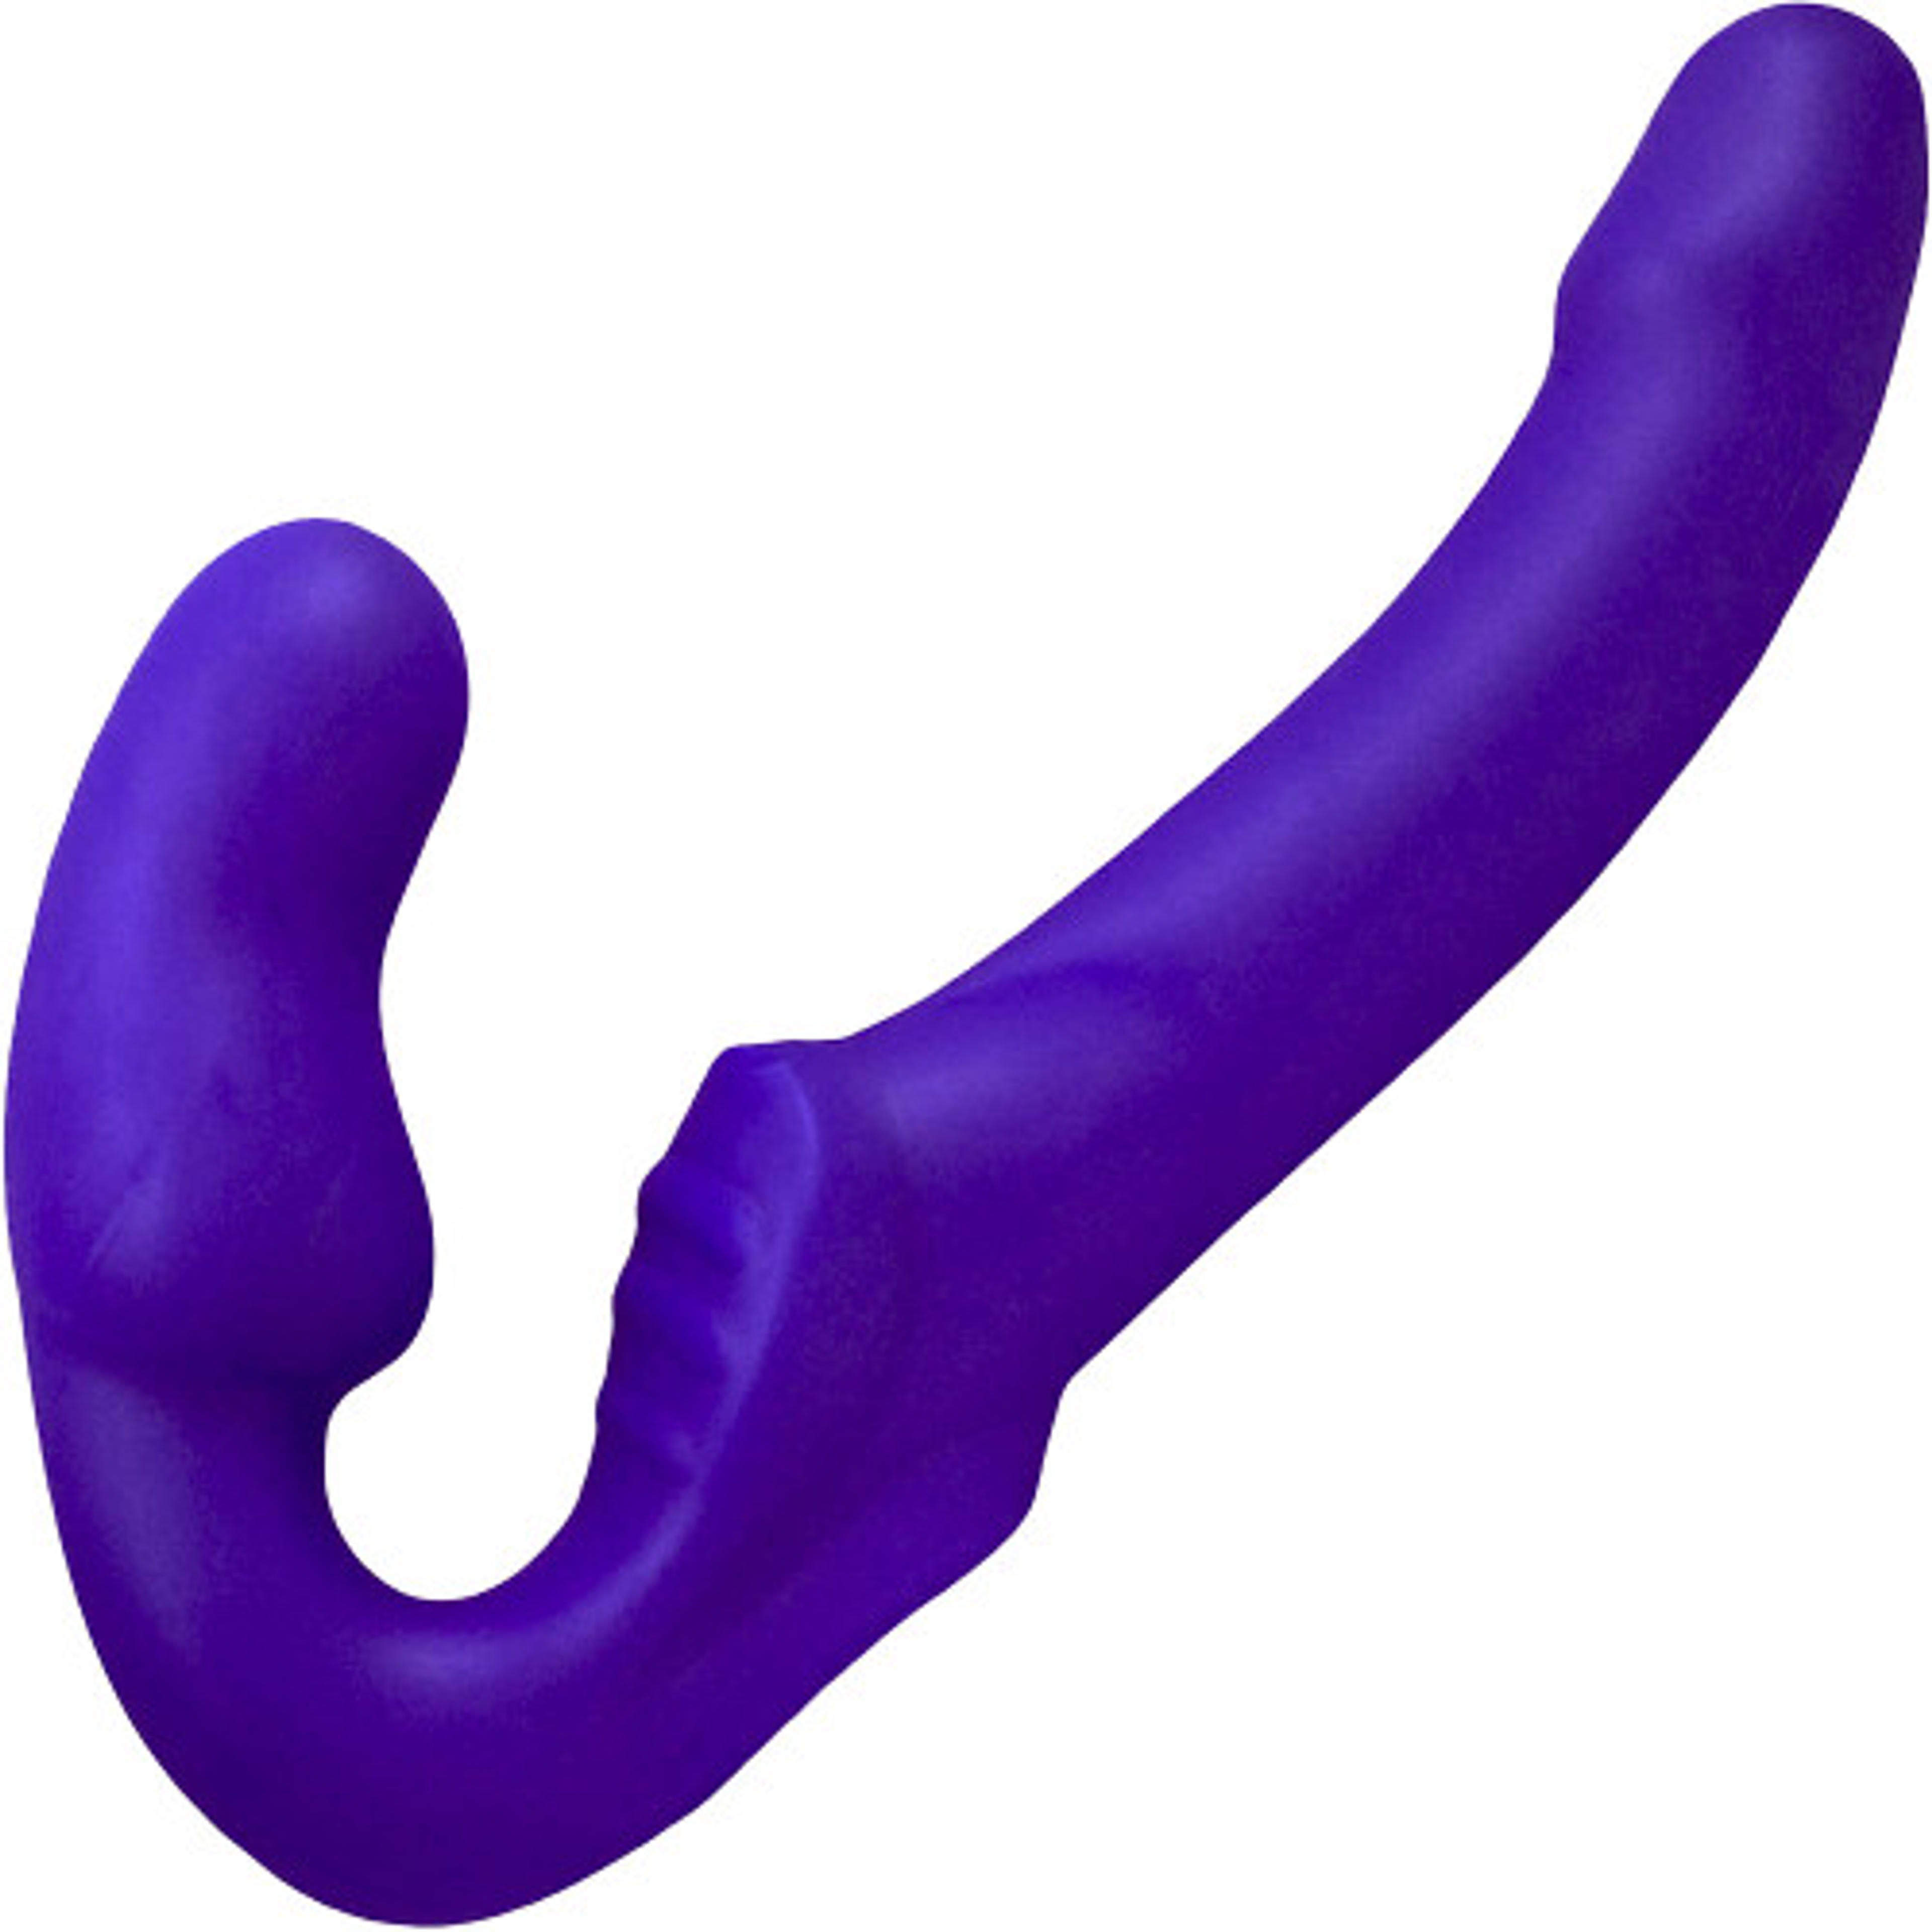 Fuze Tango Double Ended Dildo, Purple - By Happy Valley Silicone